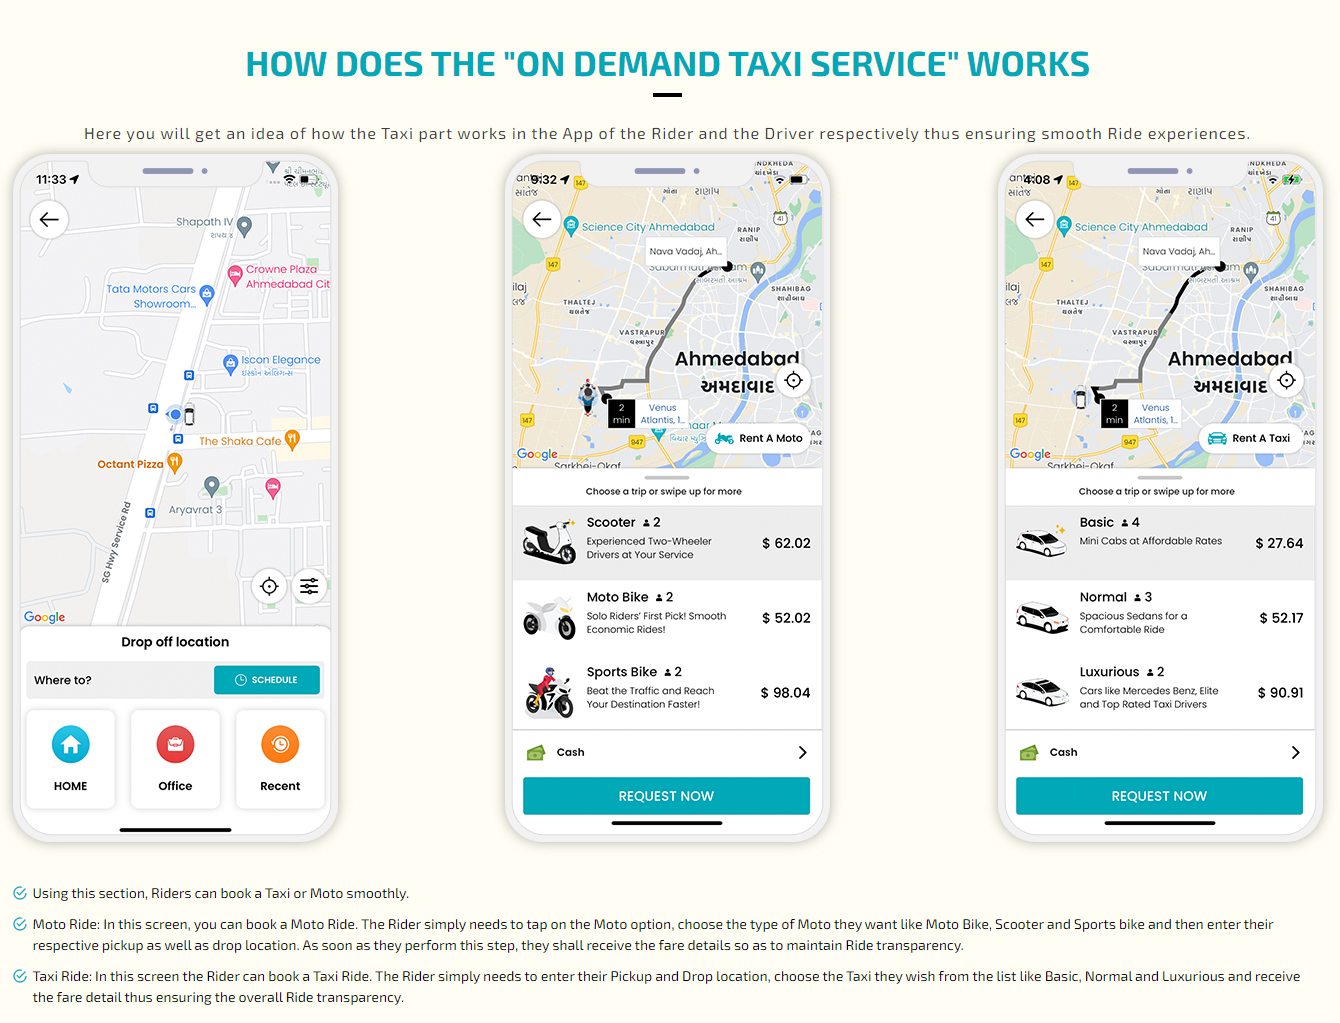 on demand taxi service works